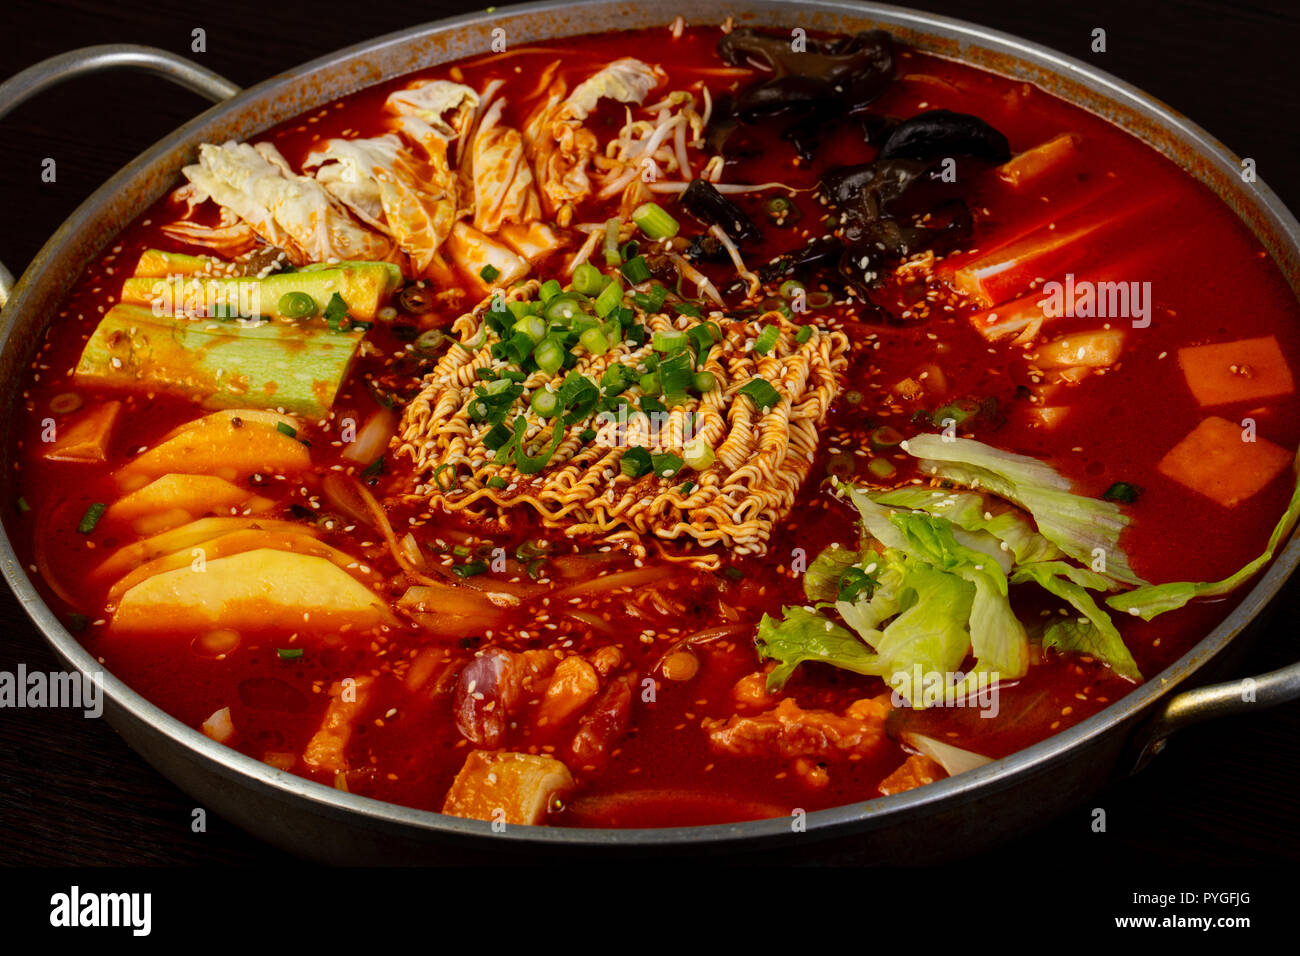 Korean cuisine hot pot with meat and seafood Stock Photo - Alamy